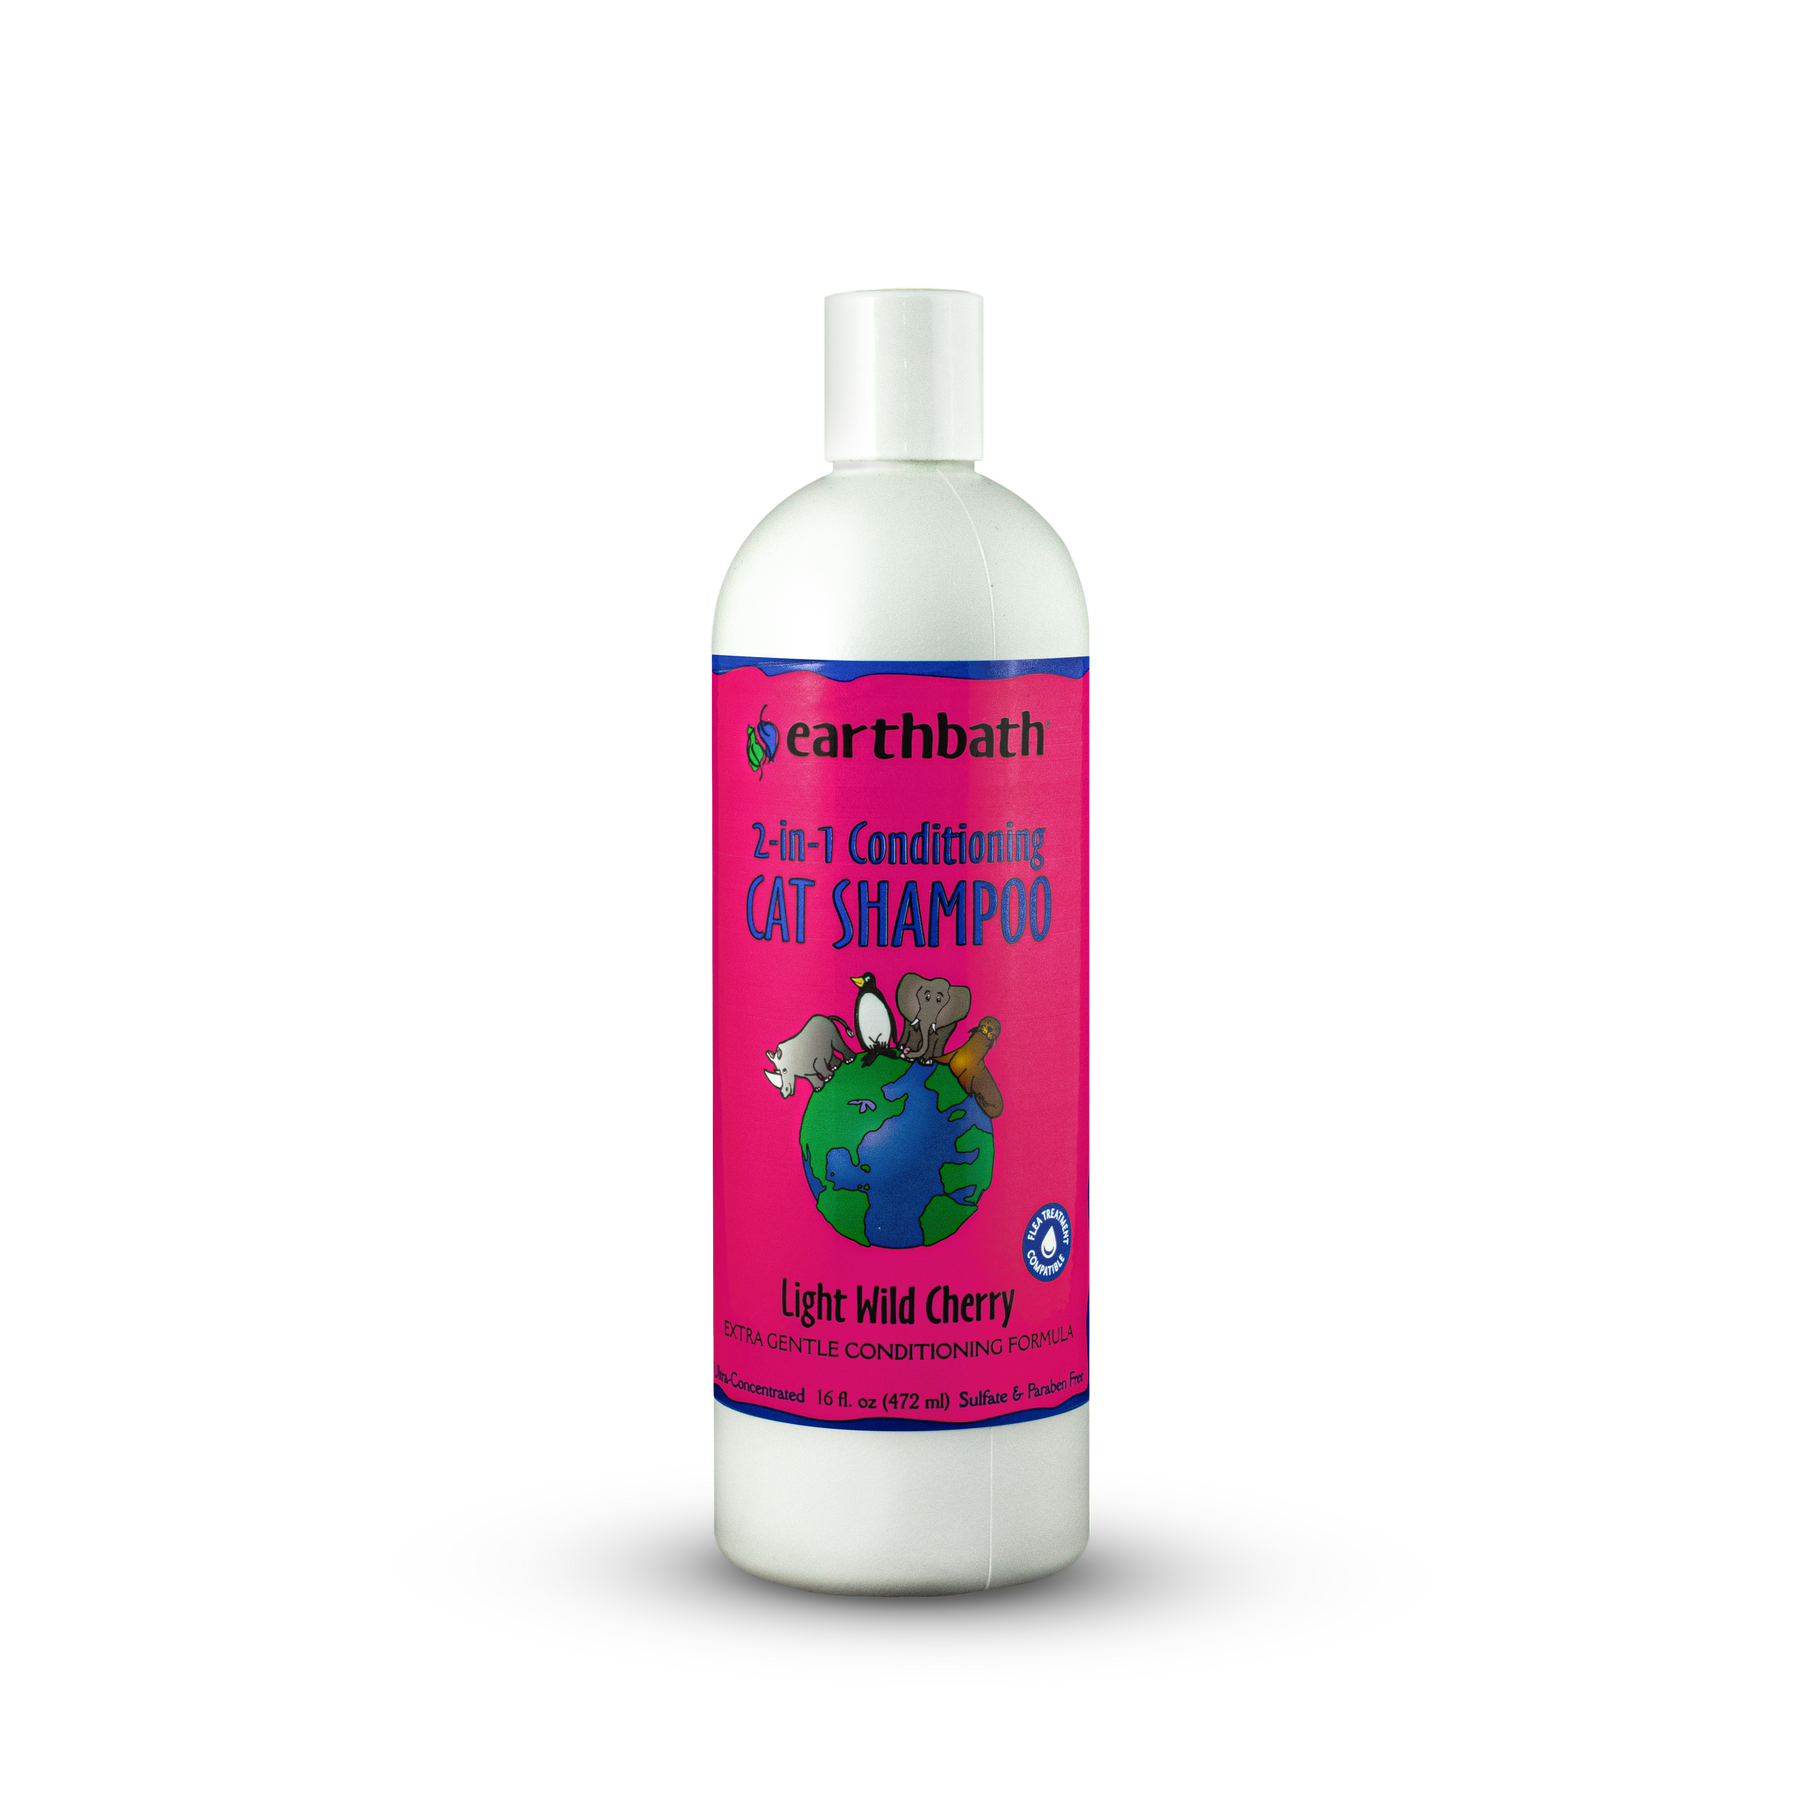 earthbath® 2-in-1 Conditioning Cat Shampoo, Light Wild Cherry, Extra Gentle Conditioning Formula, Made in USA, 16 oz